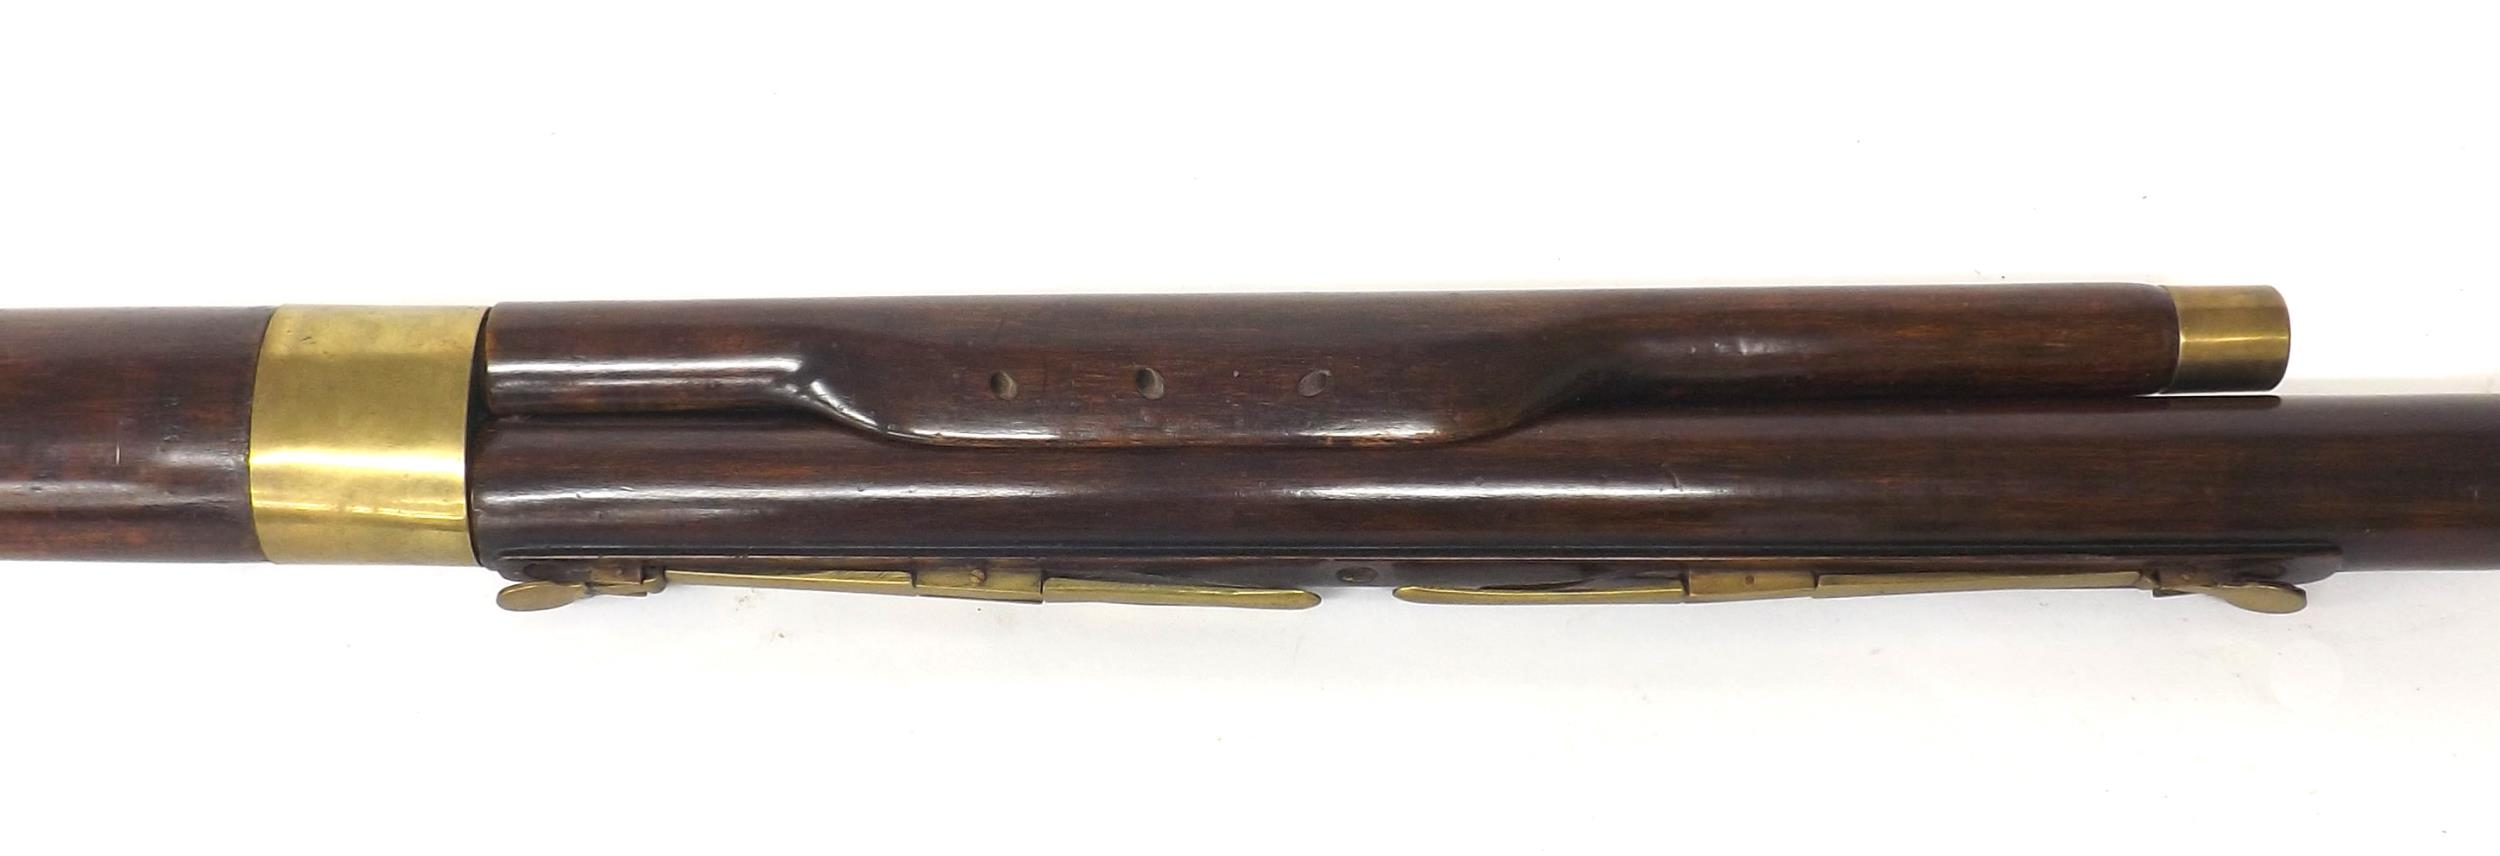 Interesting and rare mid 19th century French pearwood bassoon, by and stamped Proff á Tours, with - Image 4 of 5